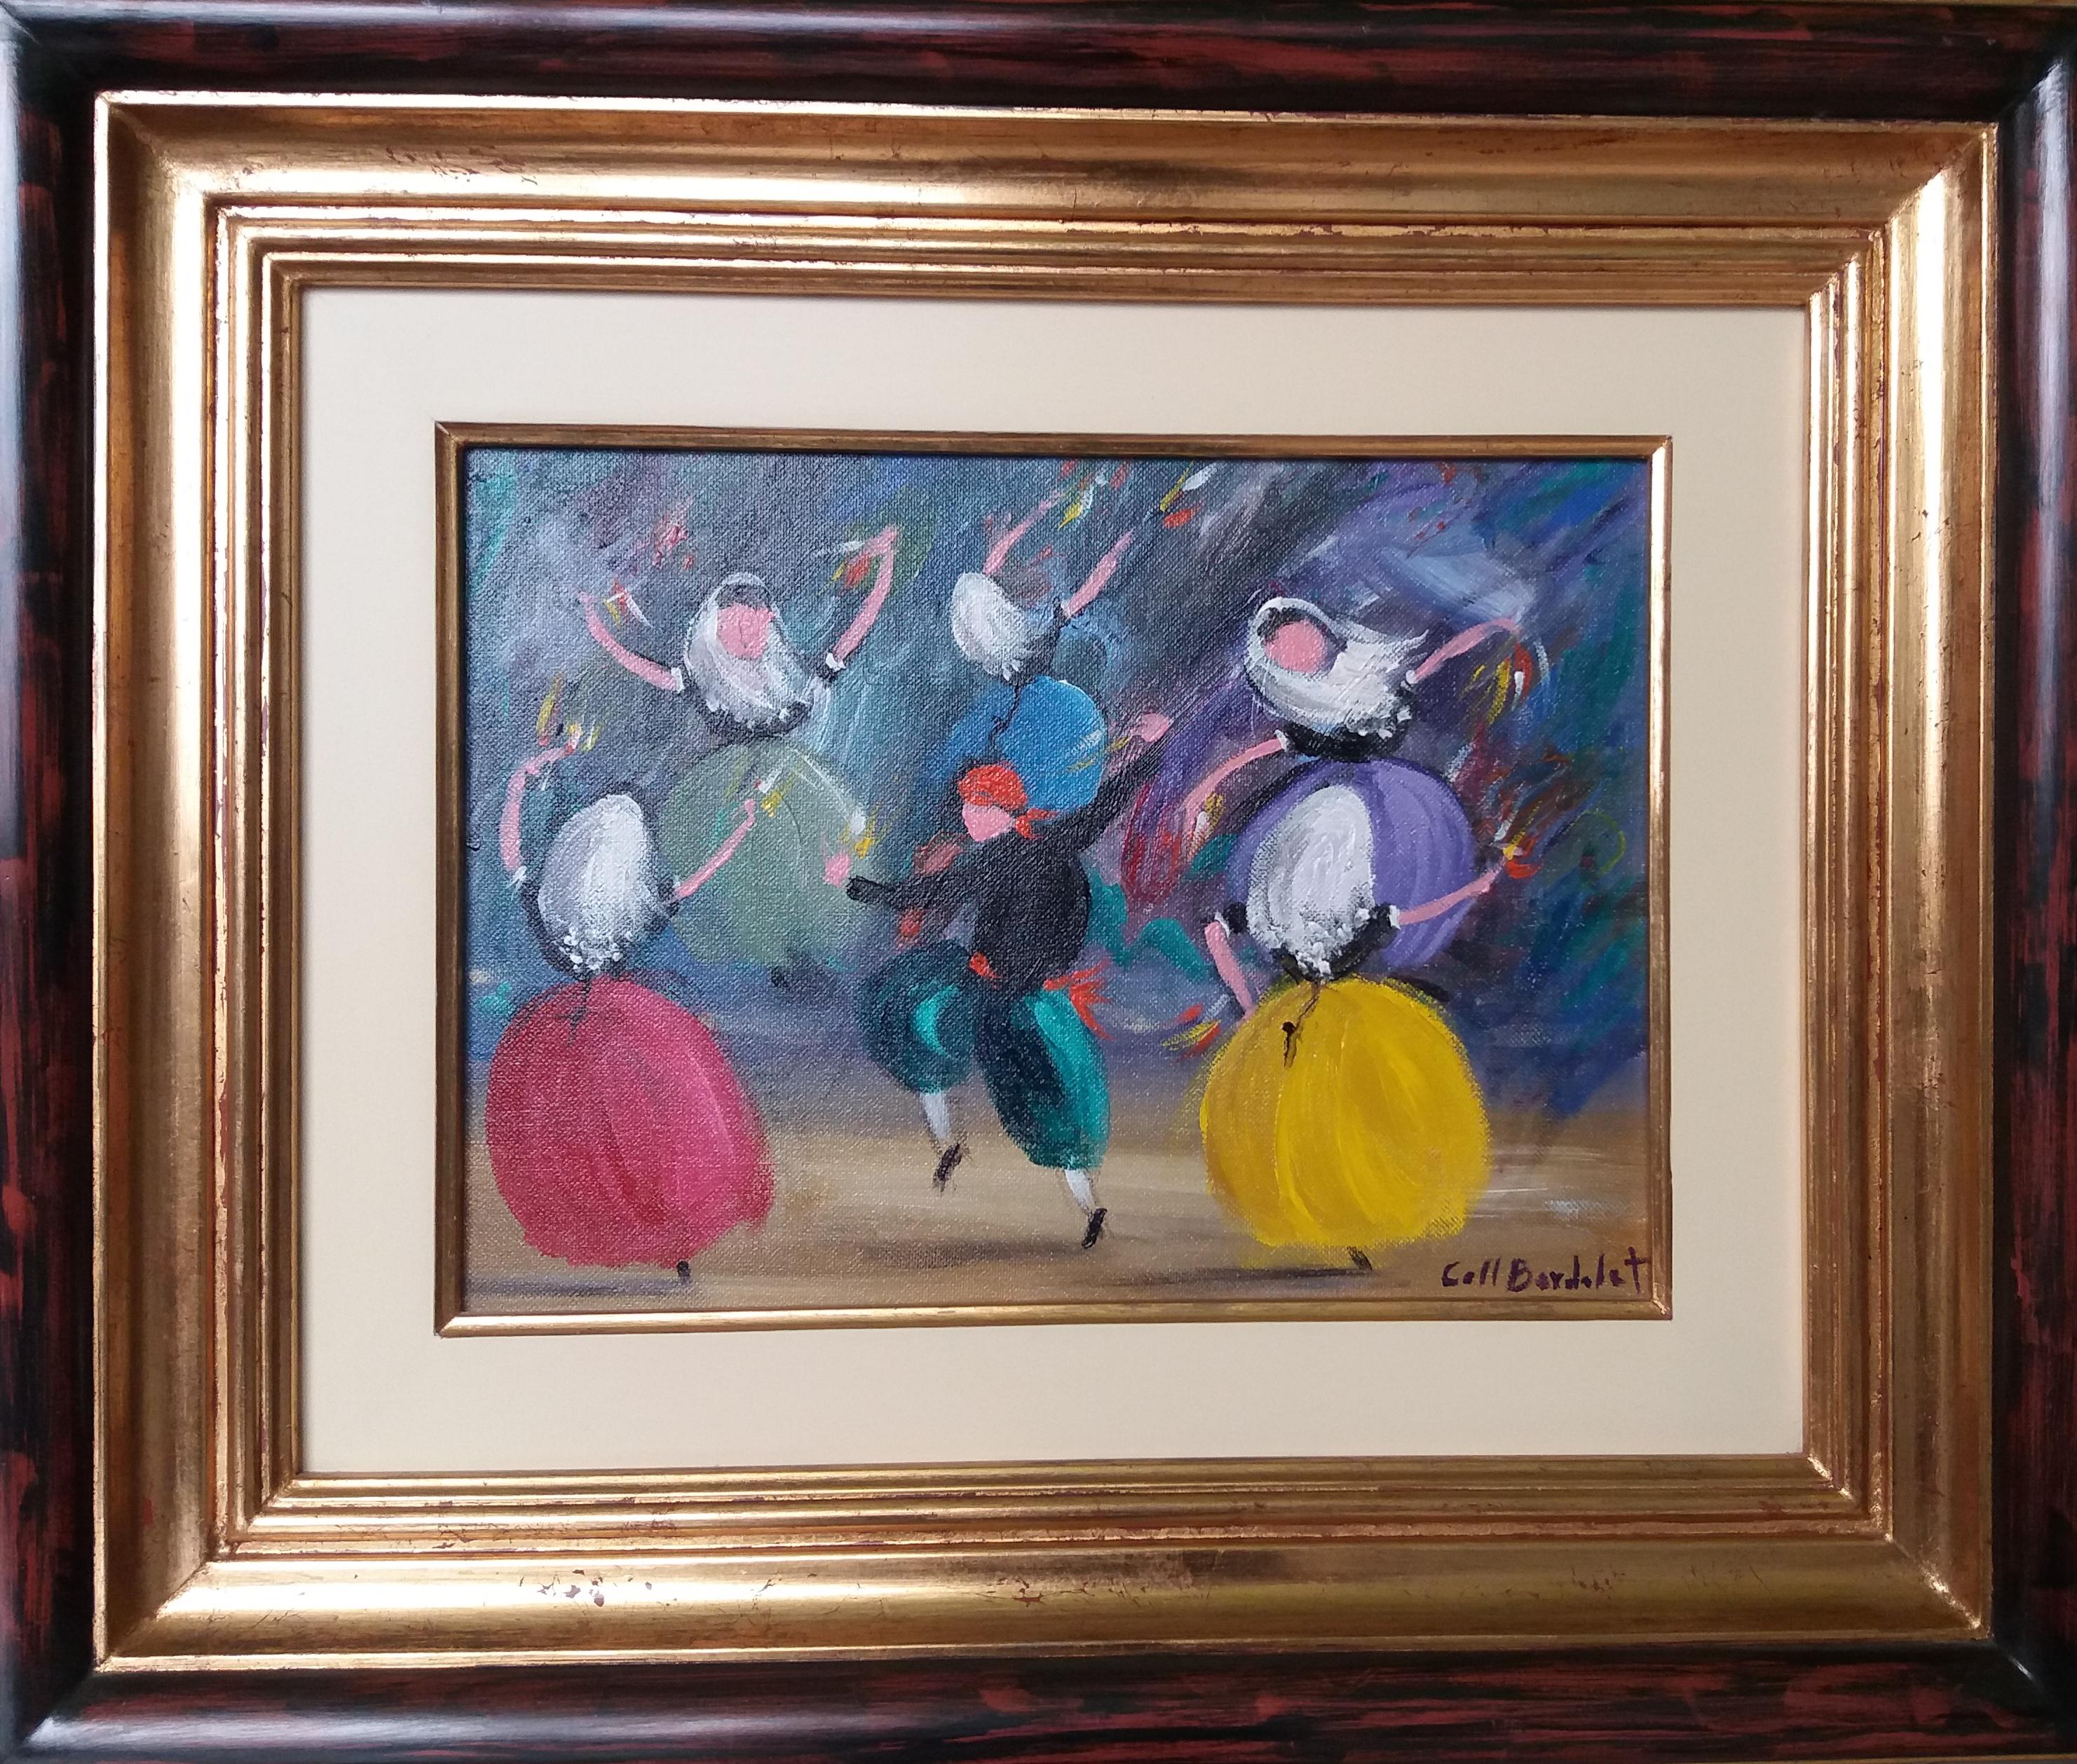  Coll Bardolet  Typical Mallorcan Dance. original expressionist acrylic painting